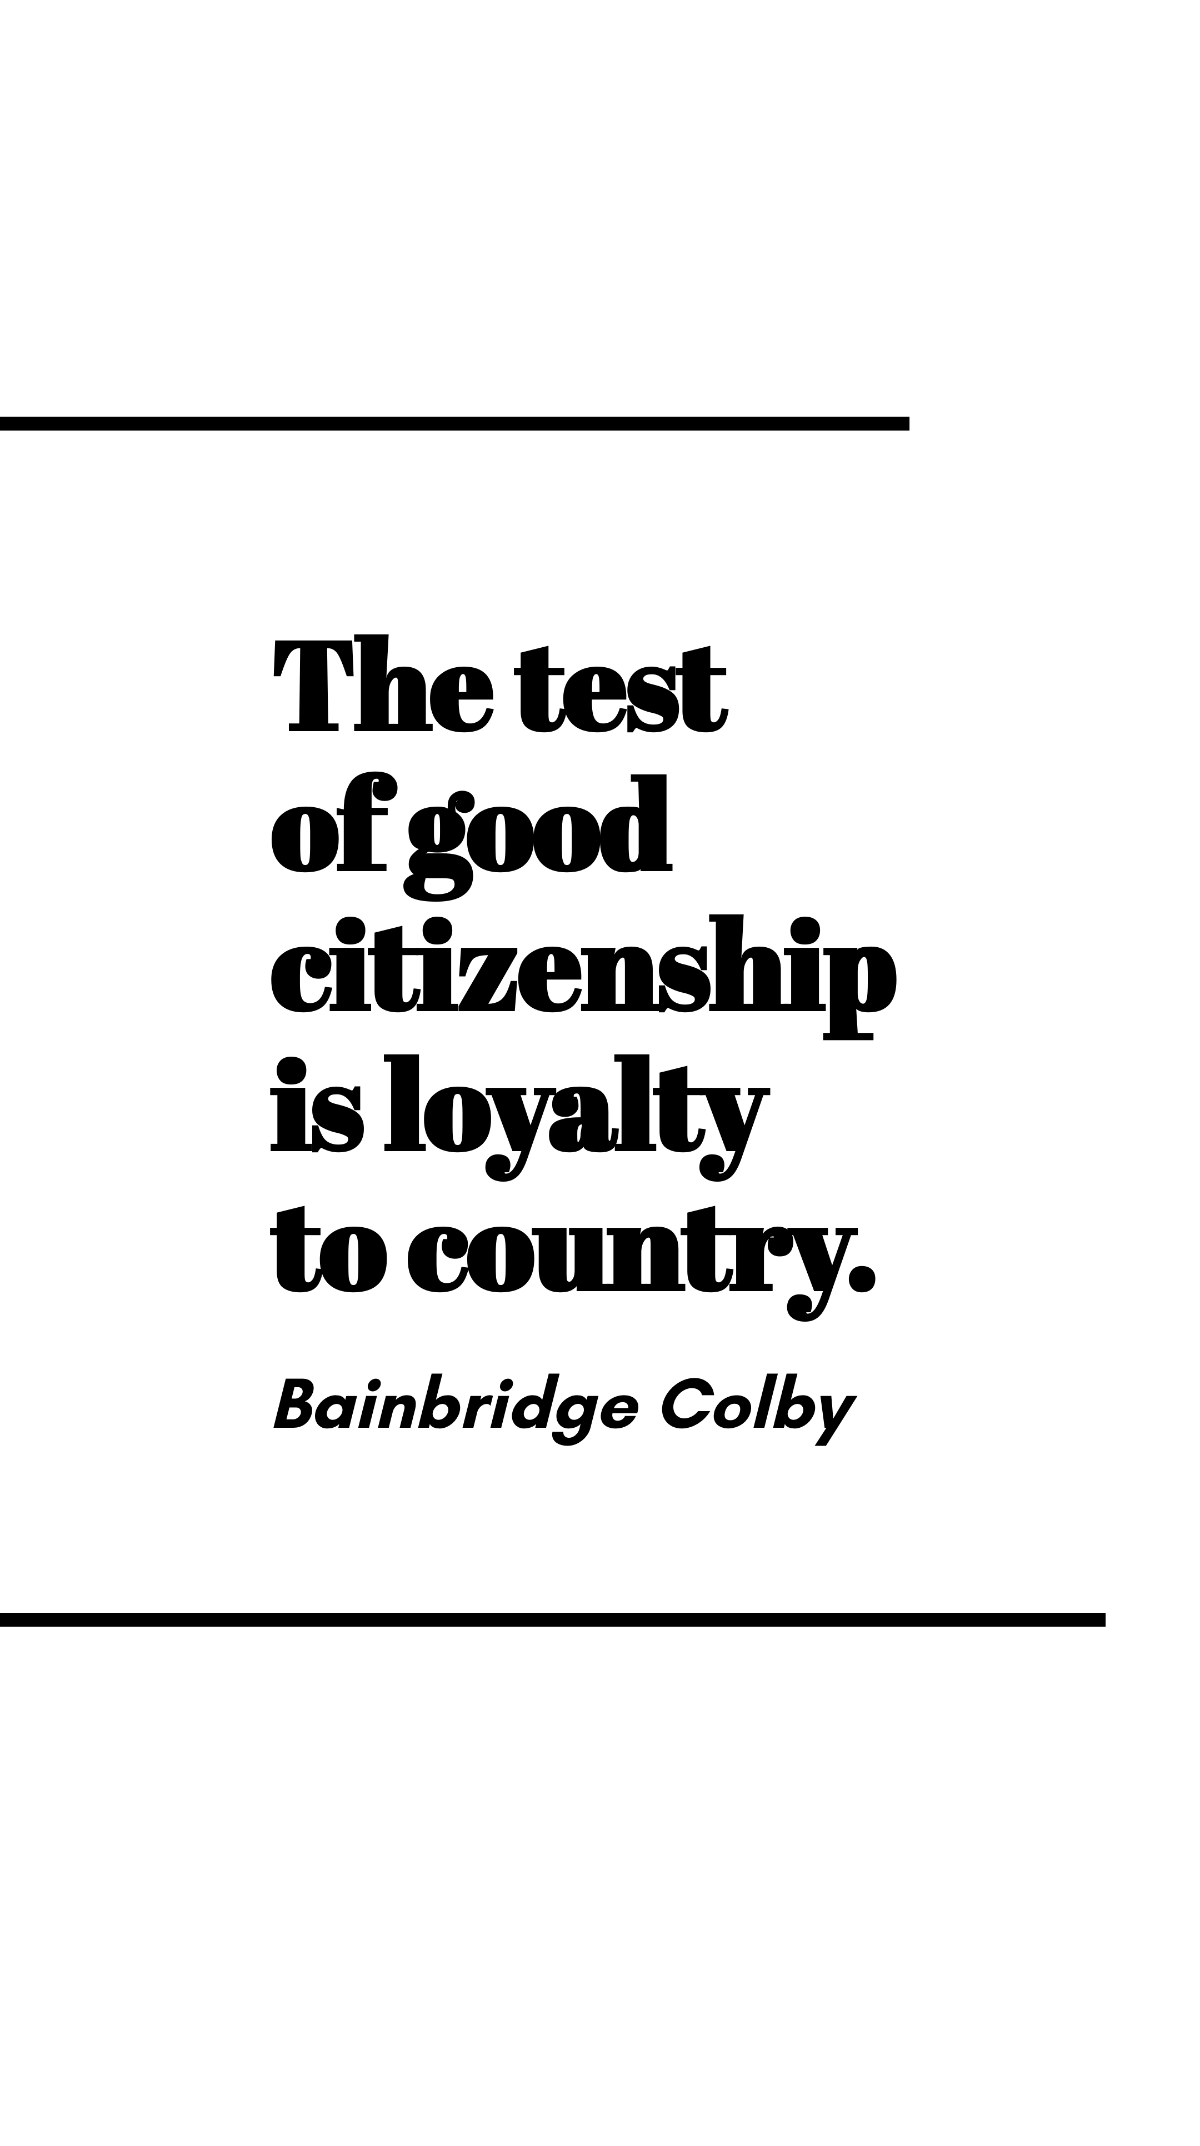 Bainbridge Colby - The test of good citizenship is loyalty to country.